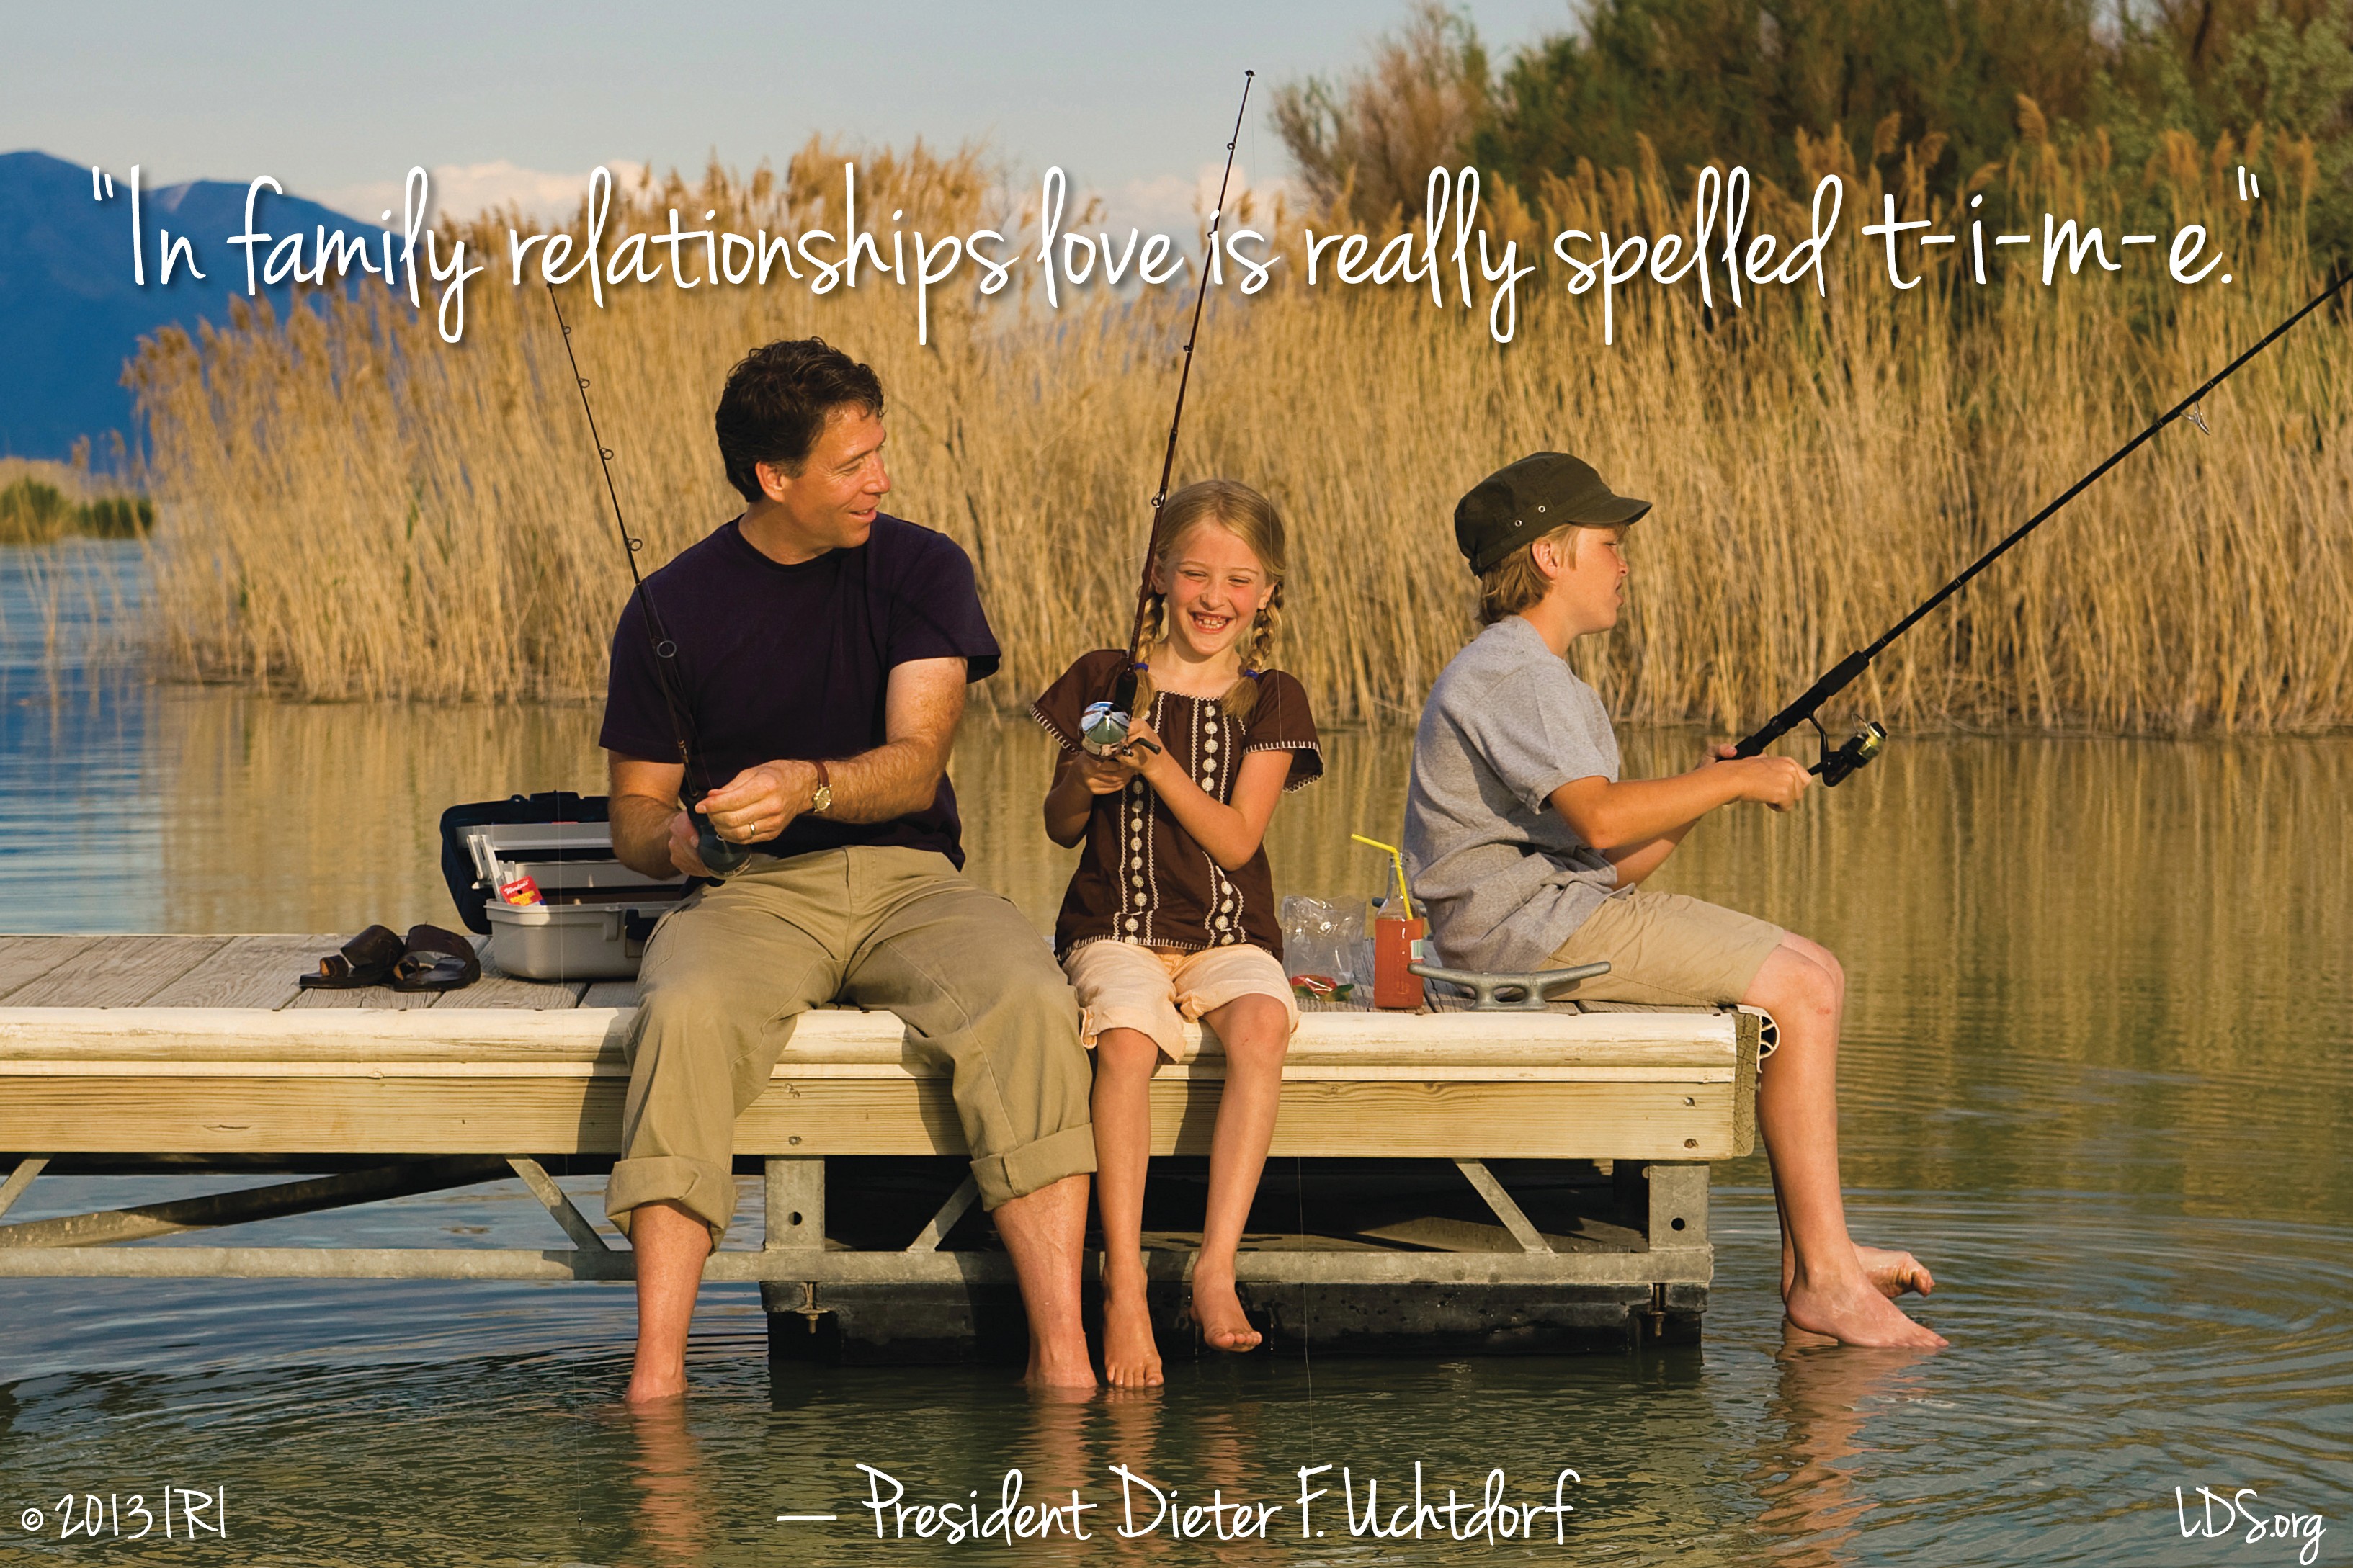 A photograph of a family fishing together, paired with a quote by President Dieter F. Uchtdorf: “Love is really spelled t-i-m-e.”